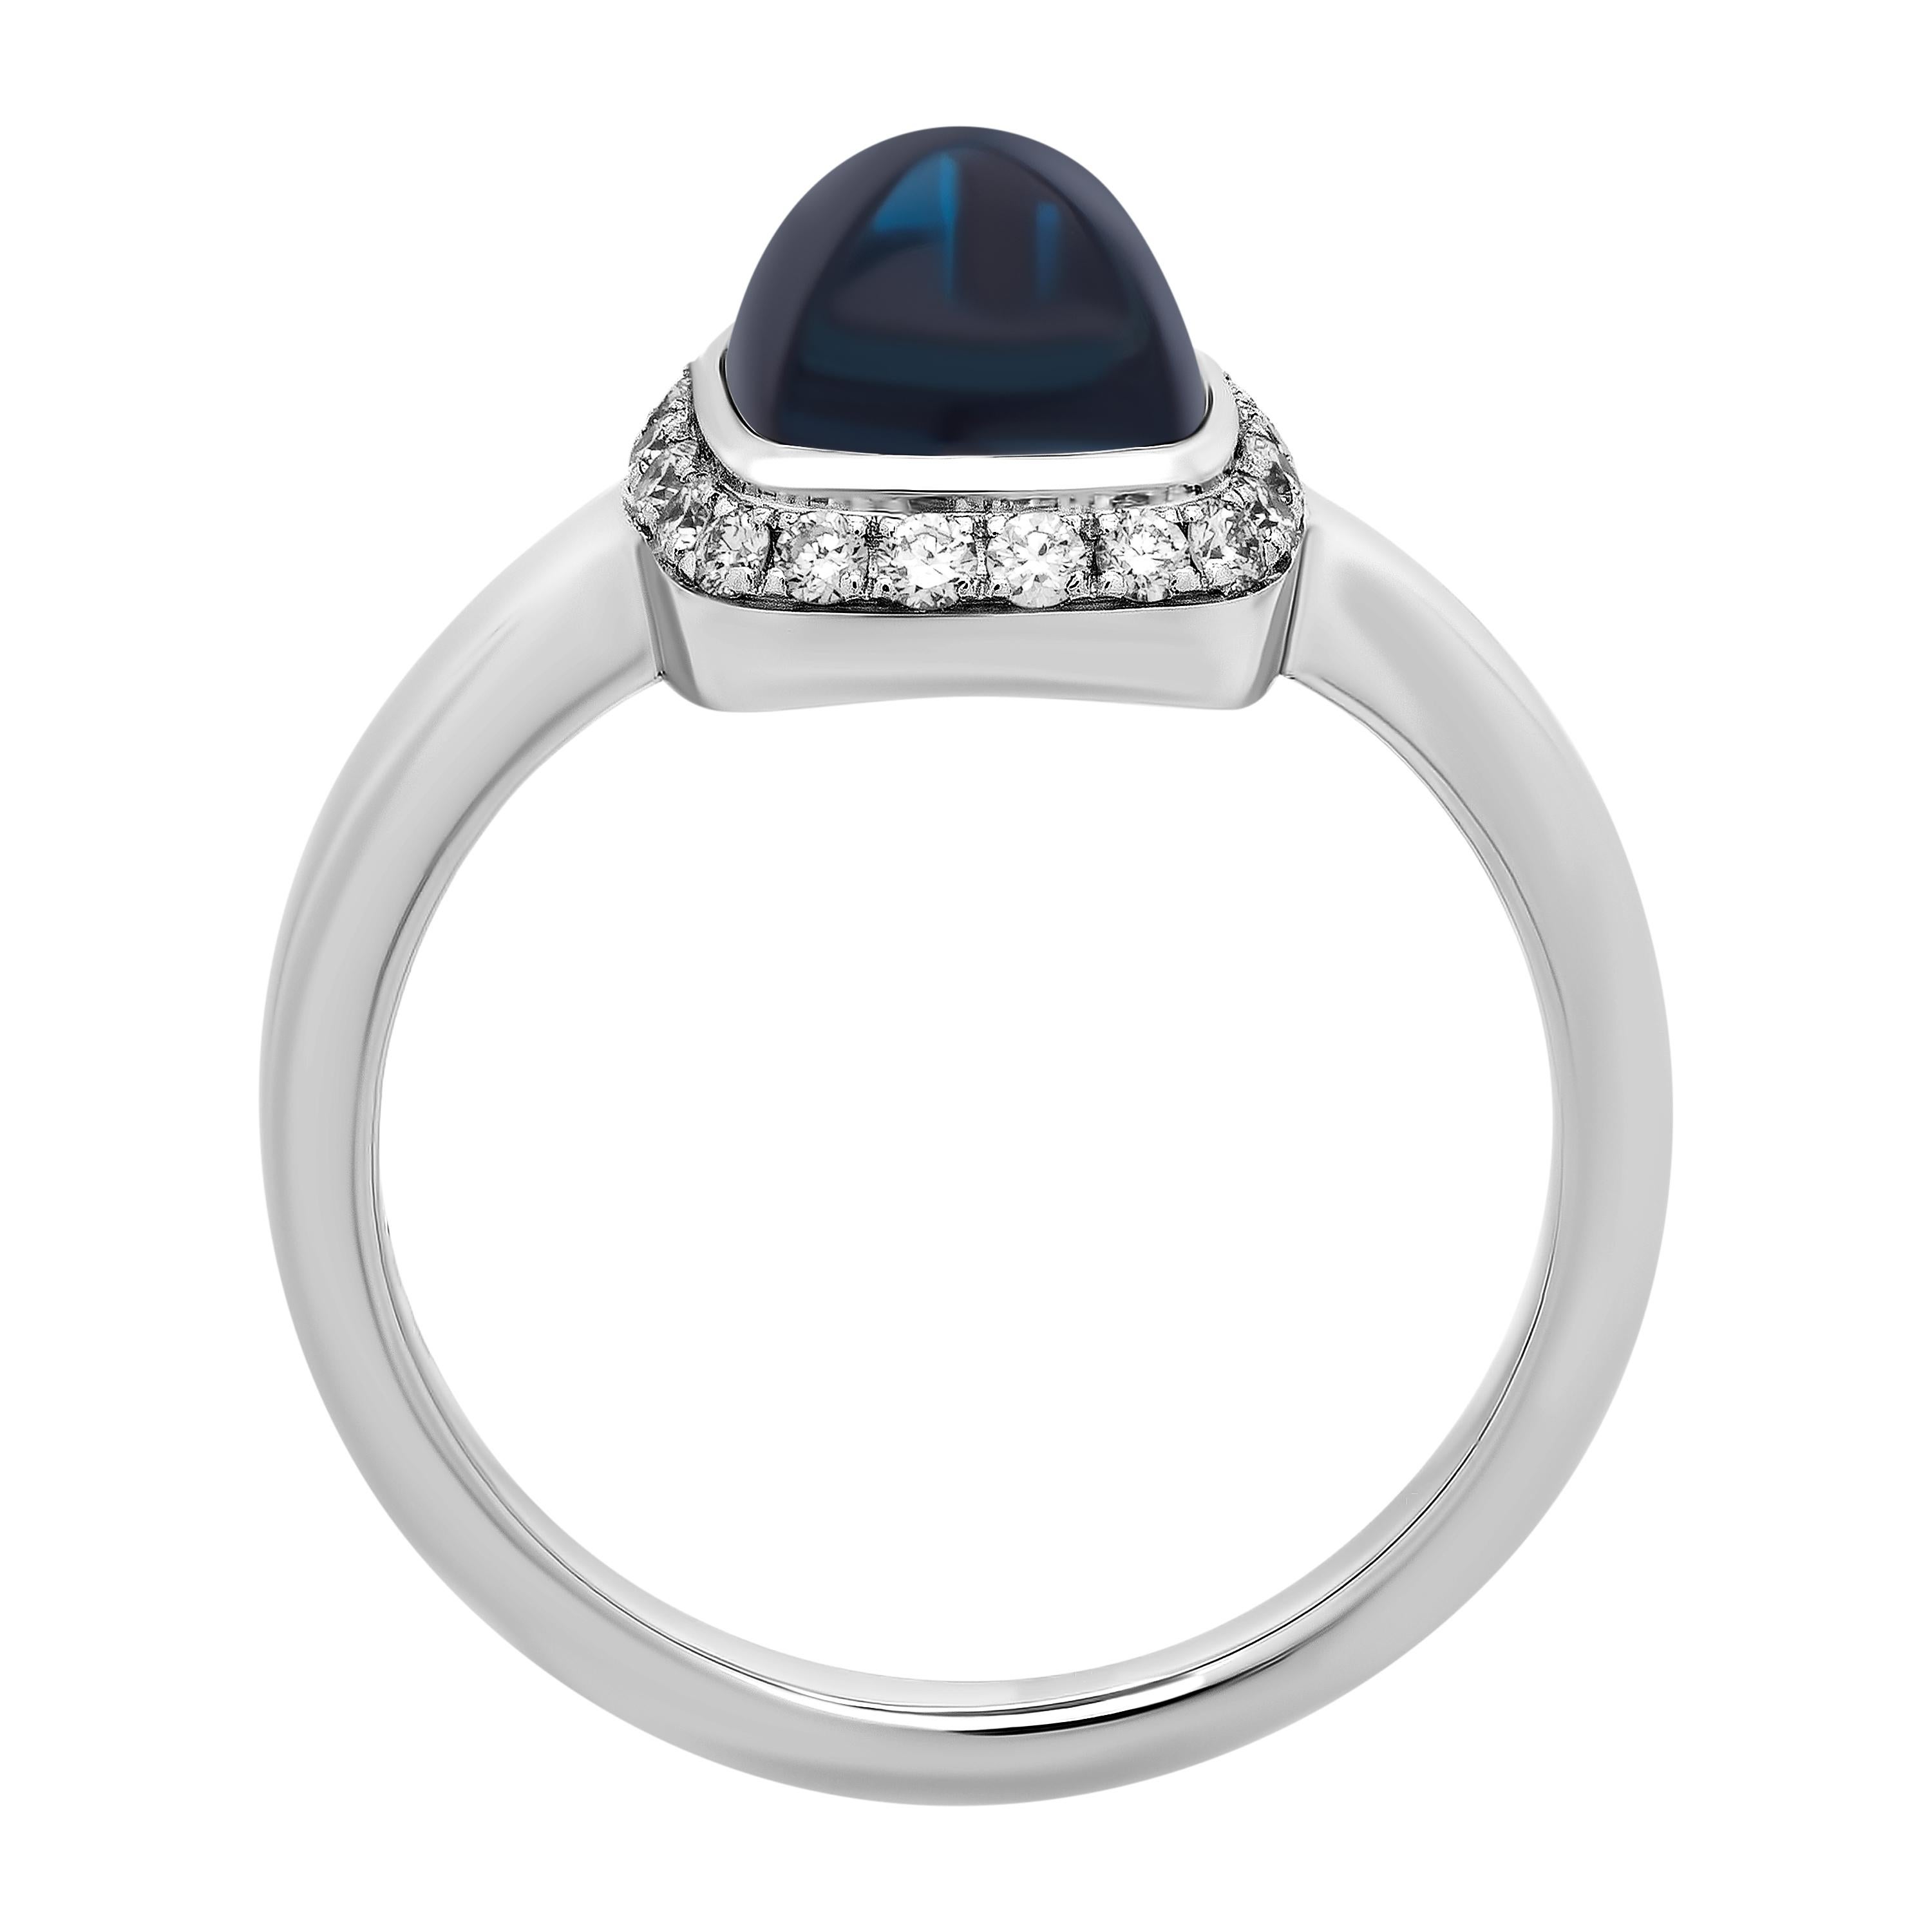 This classic FRED 18K white gold ring features a smooth square London Blue Topaz adorned with diamonds. The ring size is 4. The decoration size is 0.33